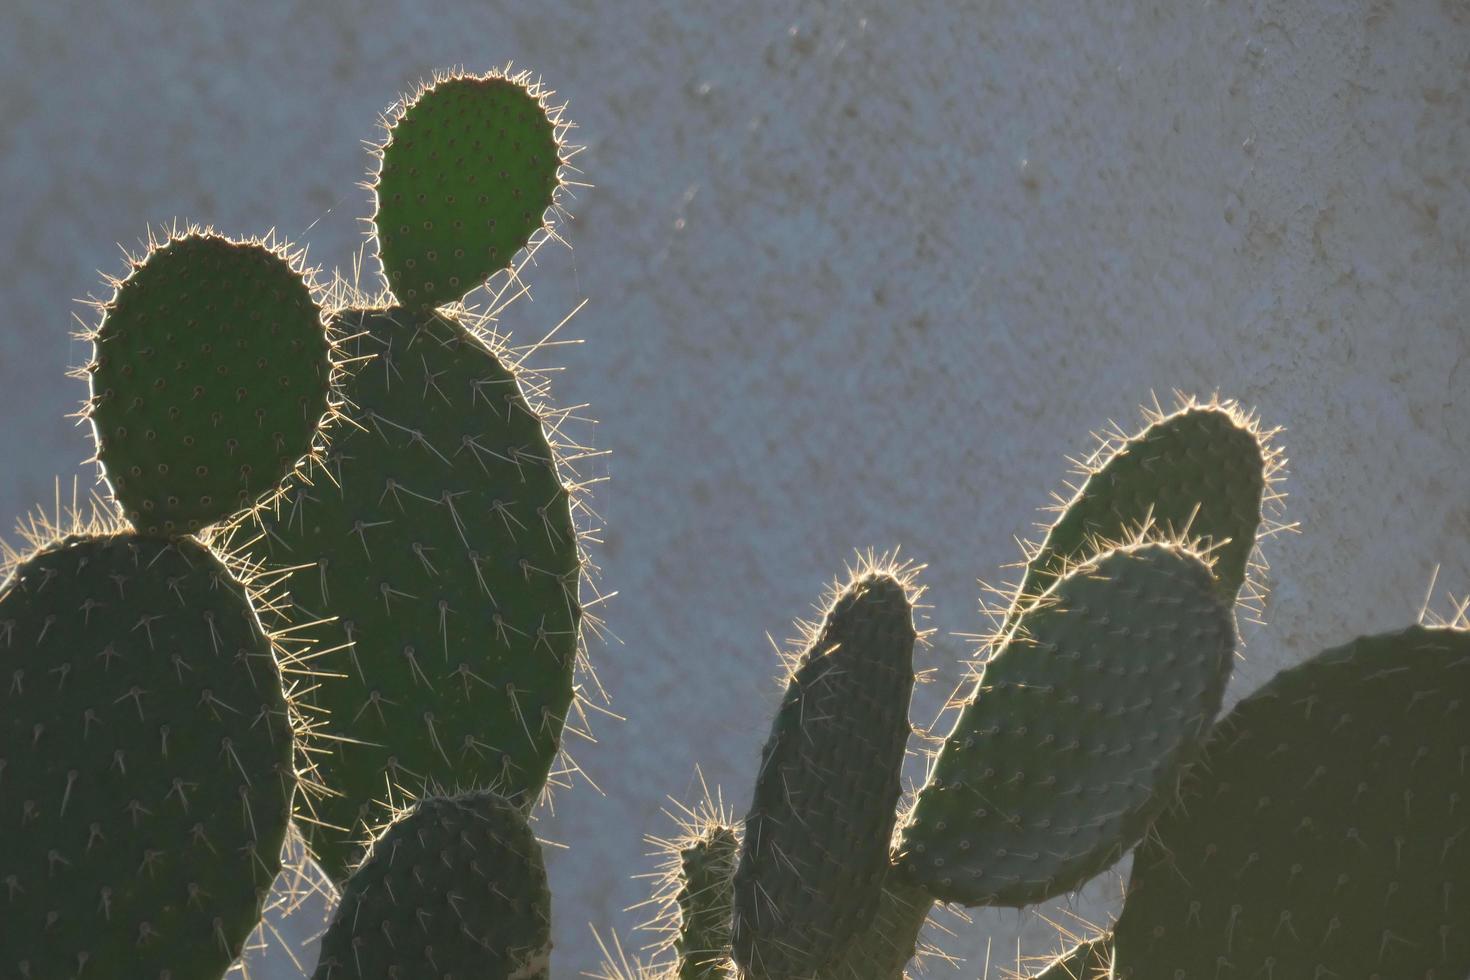 Backlit cactus typical of warm areas with little water photo